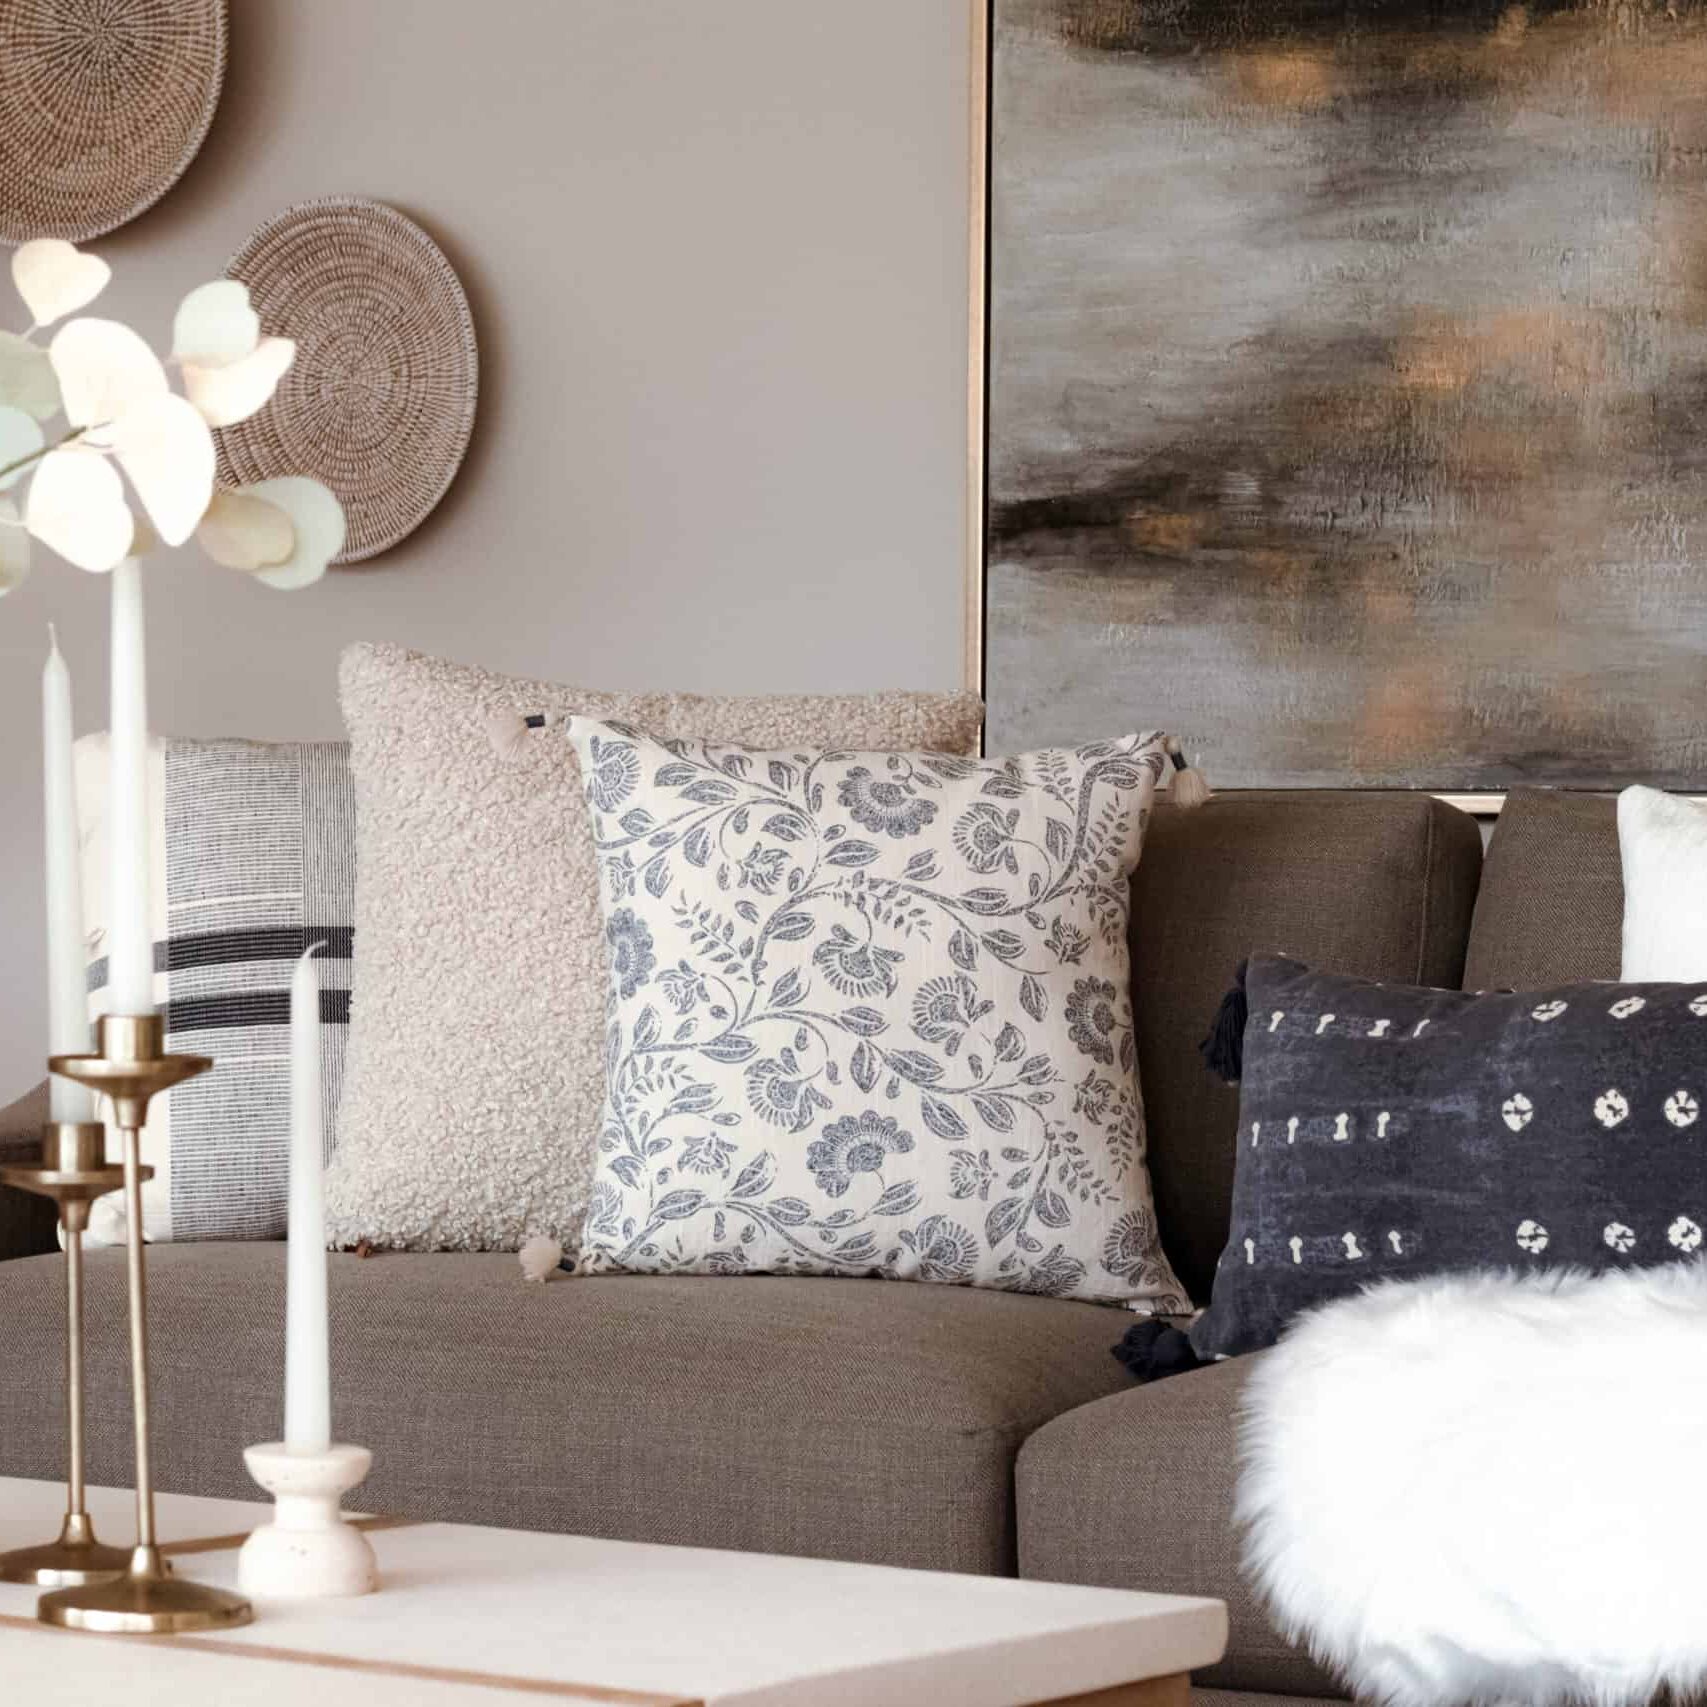 interior design details with soft browns and blue accents